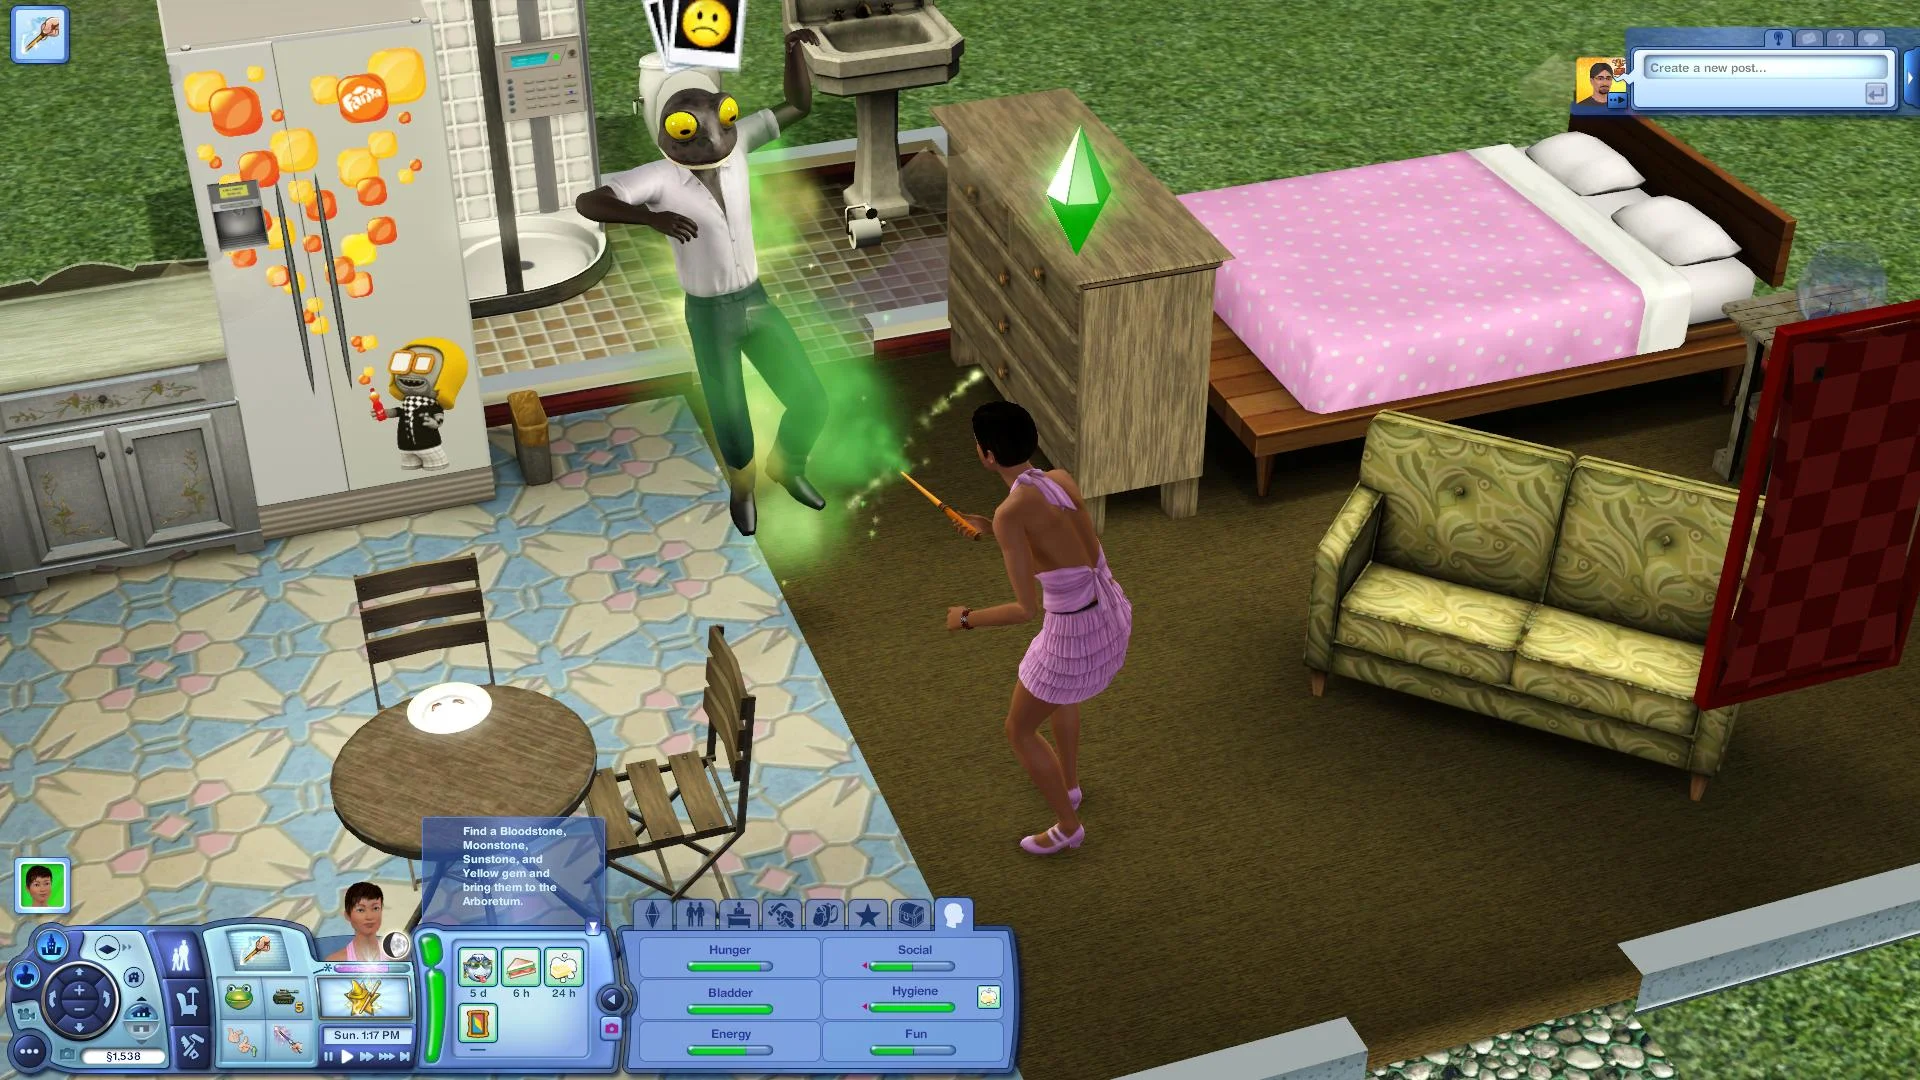 The Sims 3 Crack With Activation, Registration, CD Key TXT File Free Download